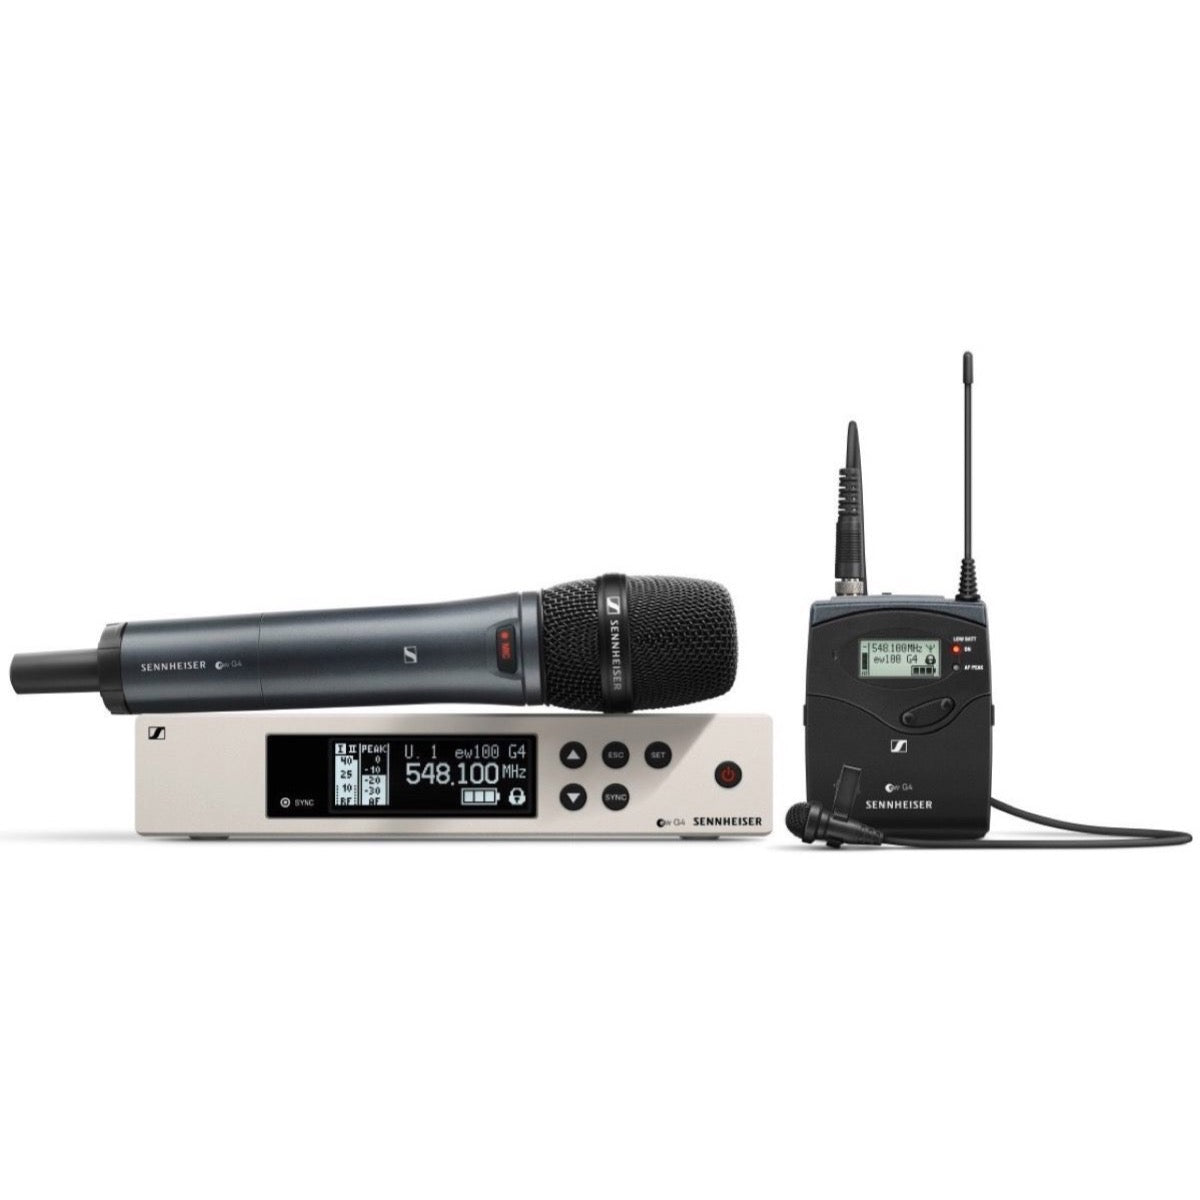 Sennheiser ew100 G4 ME2/835 Combination Wireless Microphone System , Band A (516-558 MHz)